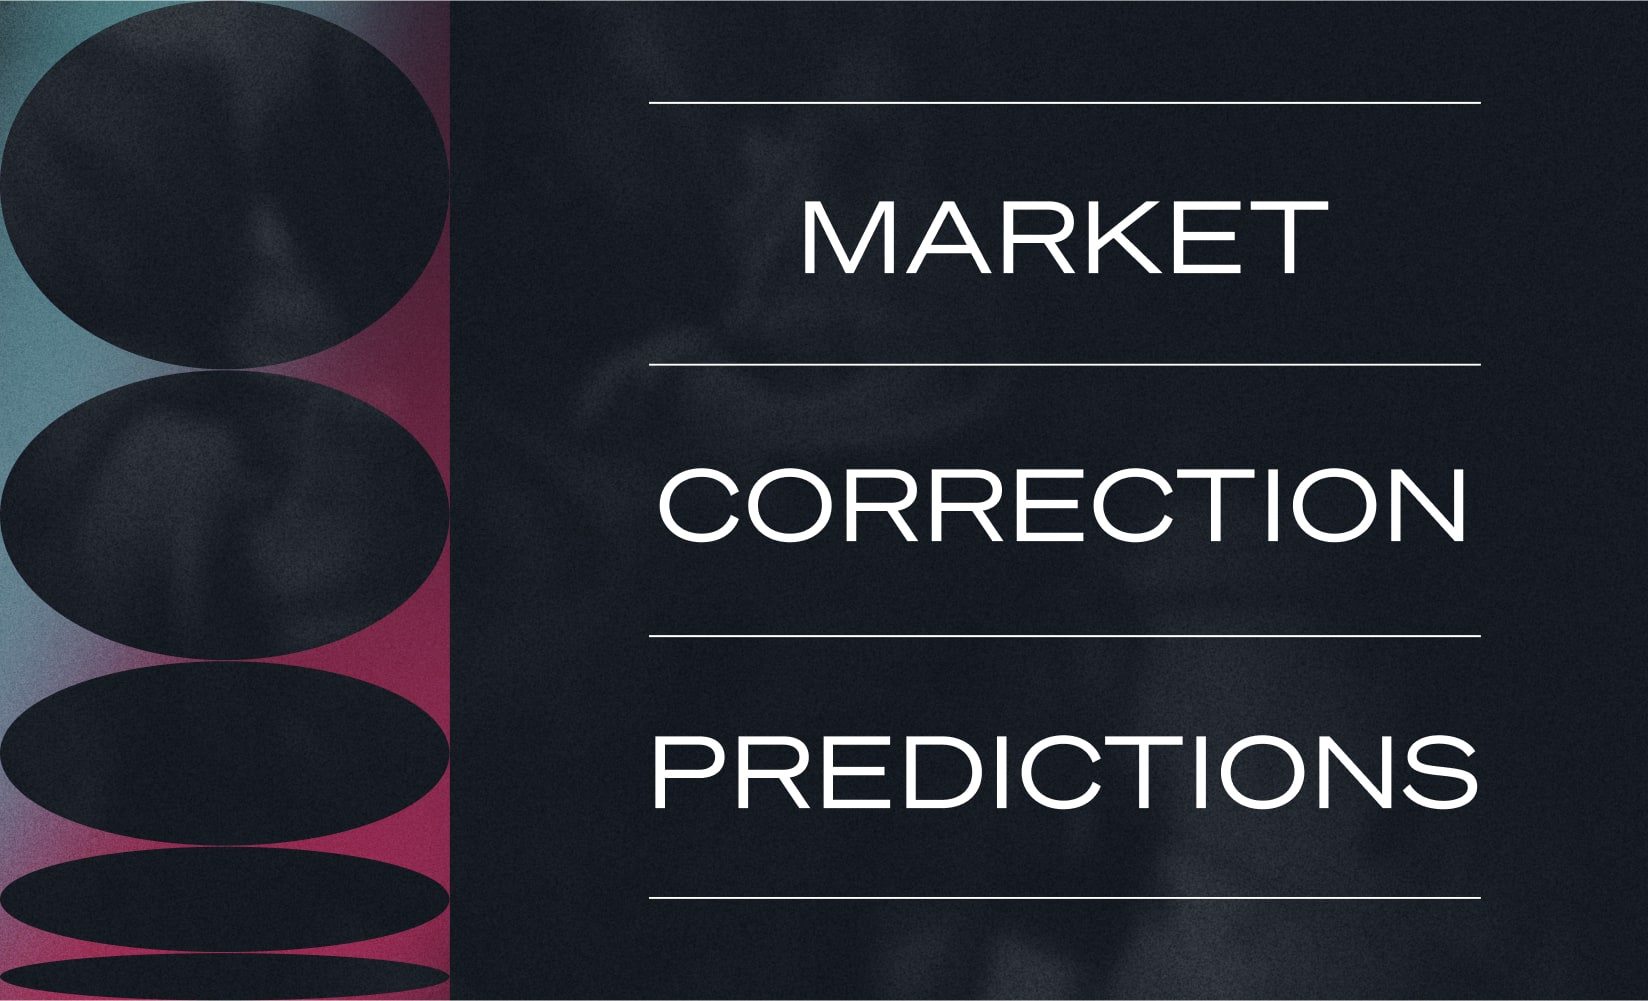 62d07f37ee45eb5ddfed8234 5 Predictions for what the market correction may mean for the ecommerce ecosystem V2